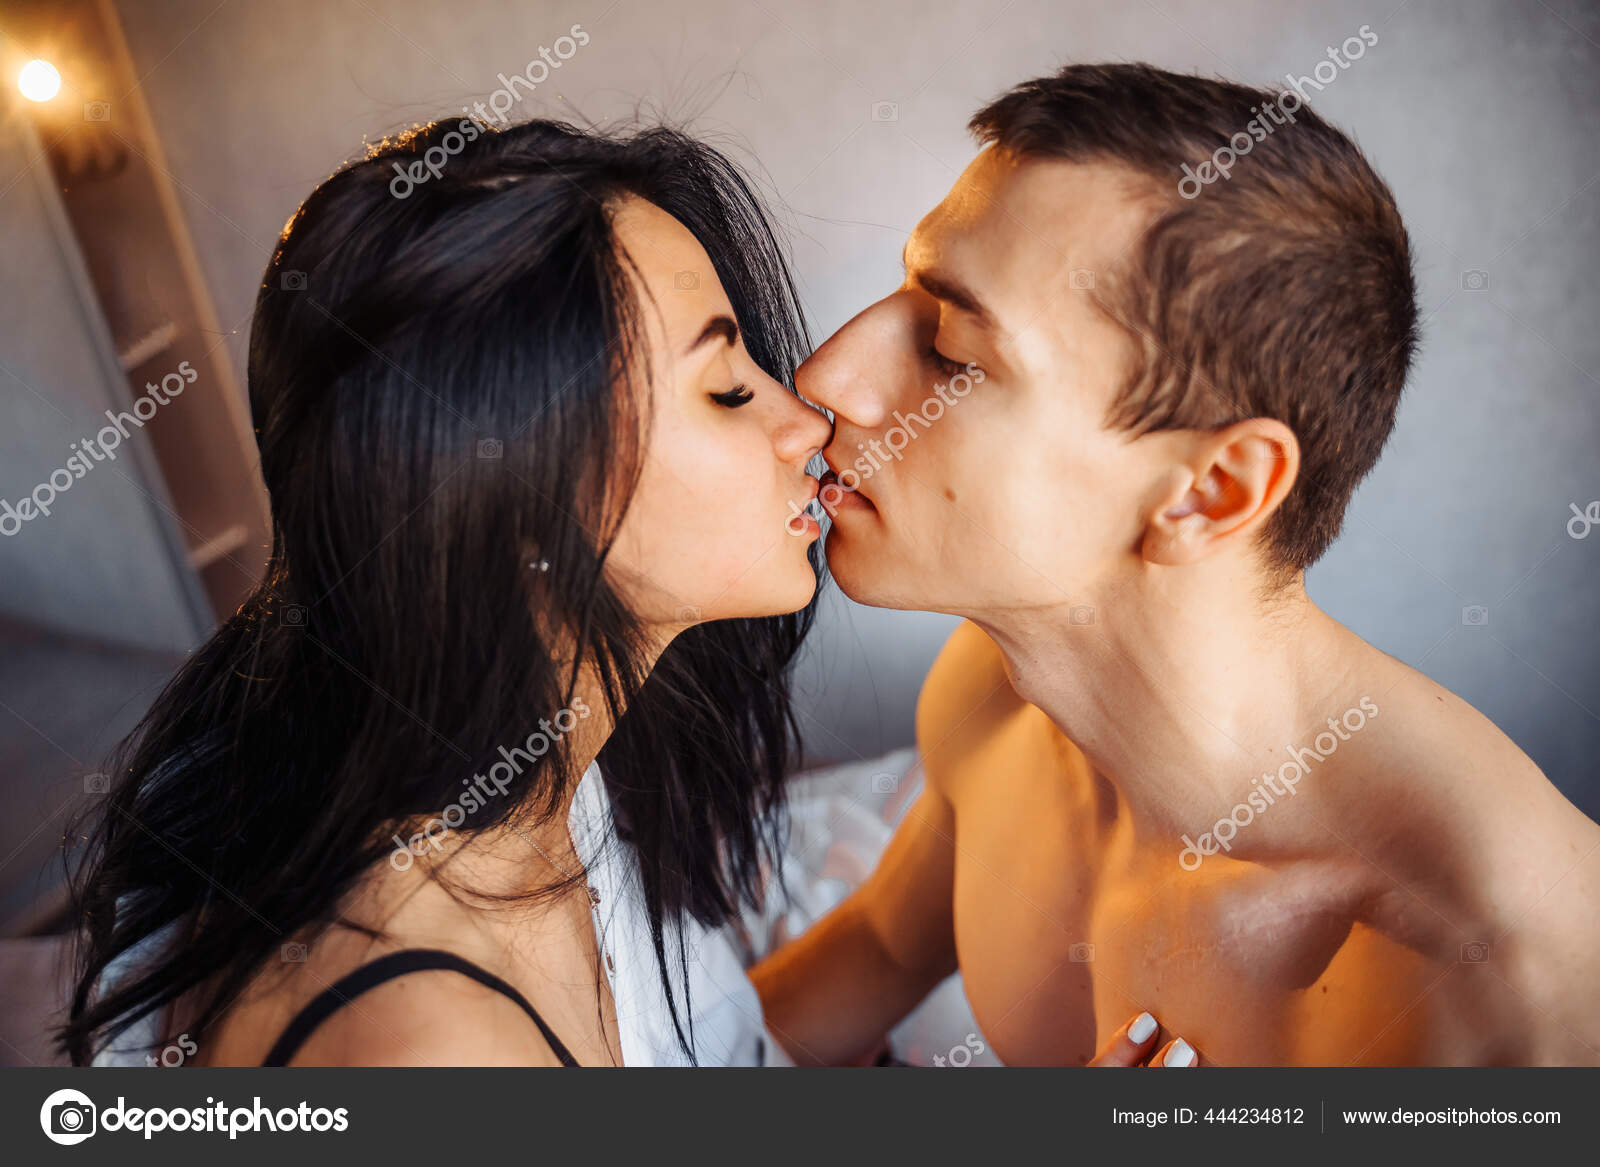 Close Beautiful Nude Couple Two Young People Love Having Sex Stock Photo by ©dariaagaf 444234812 picture